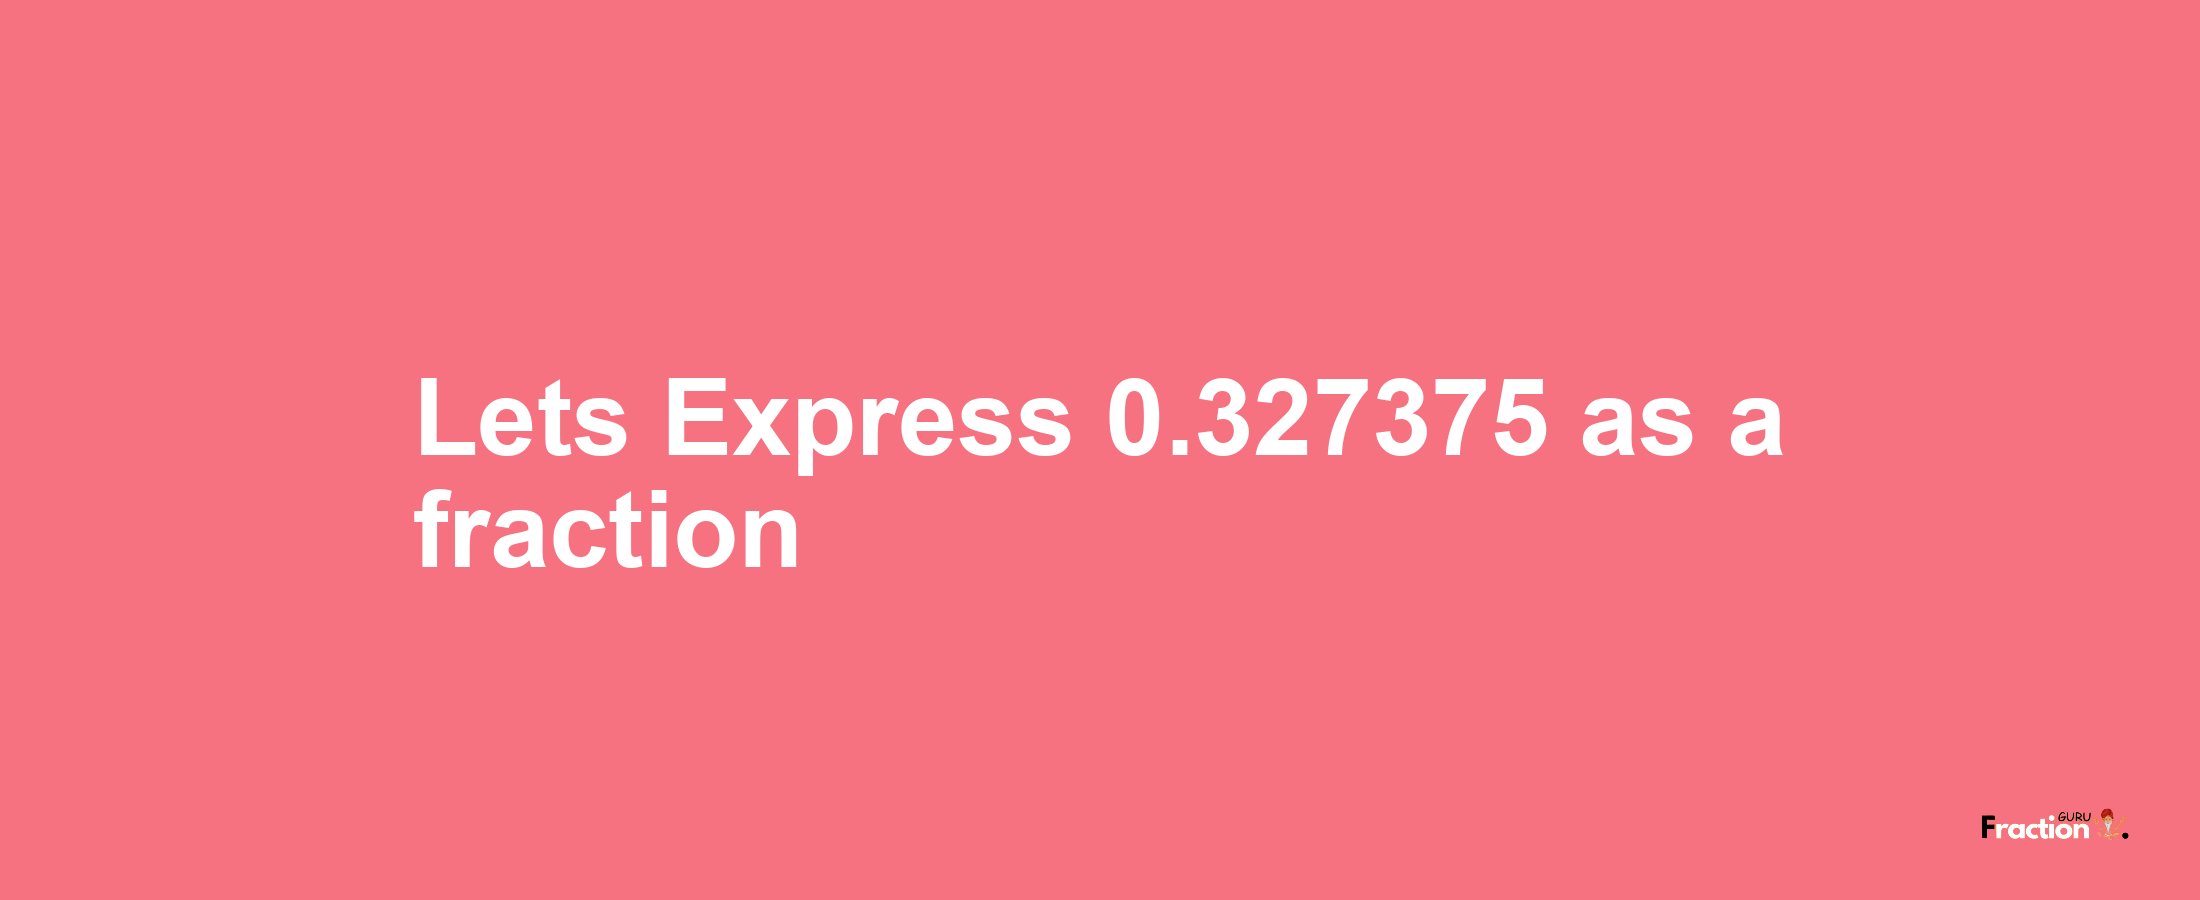 Lets Express 0.327375 as afraction